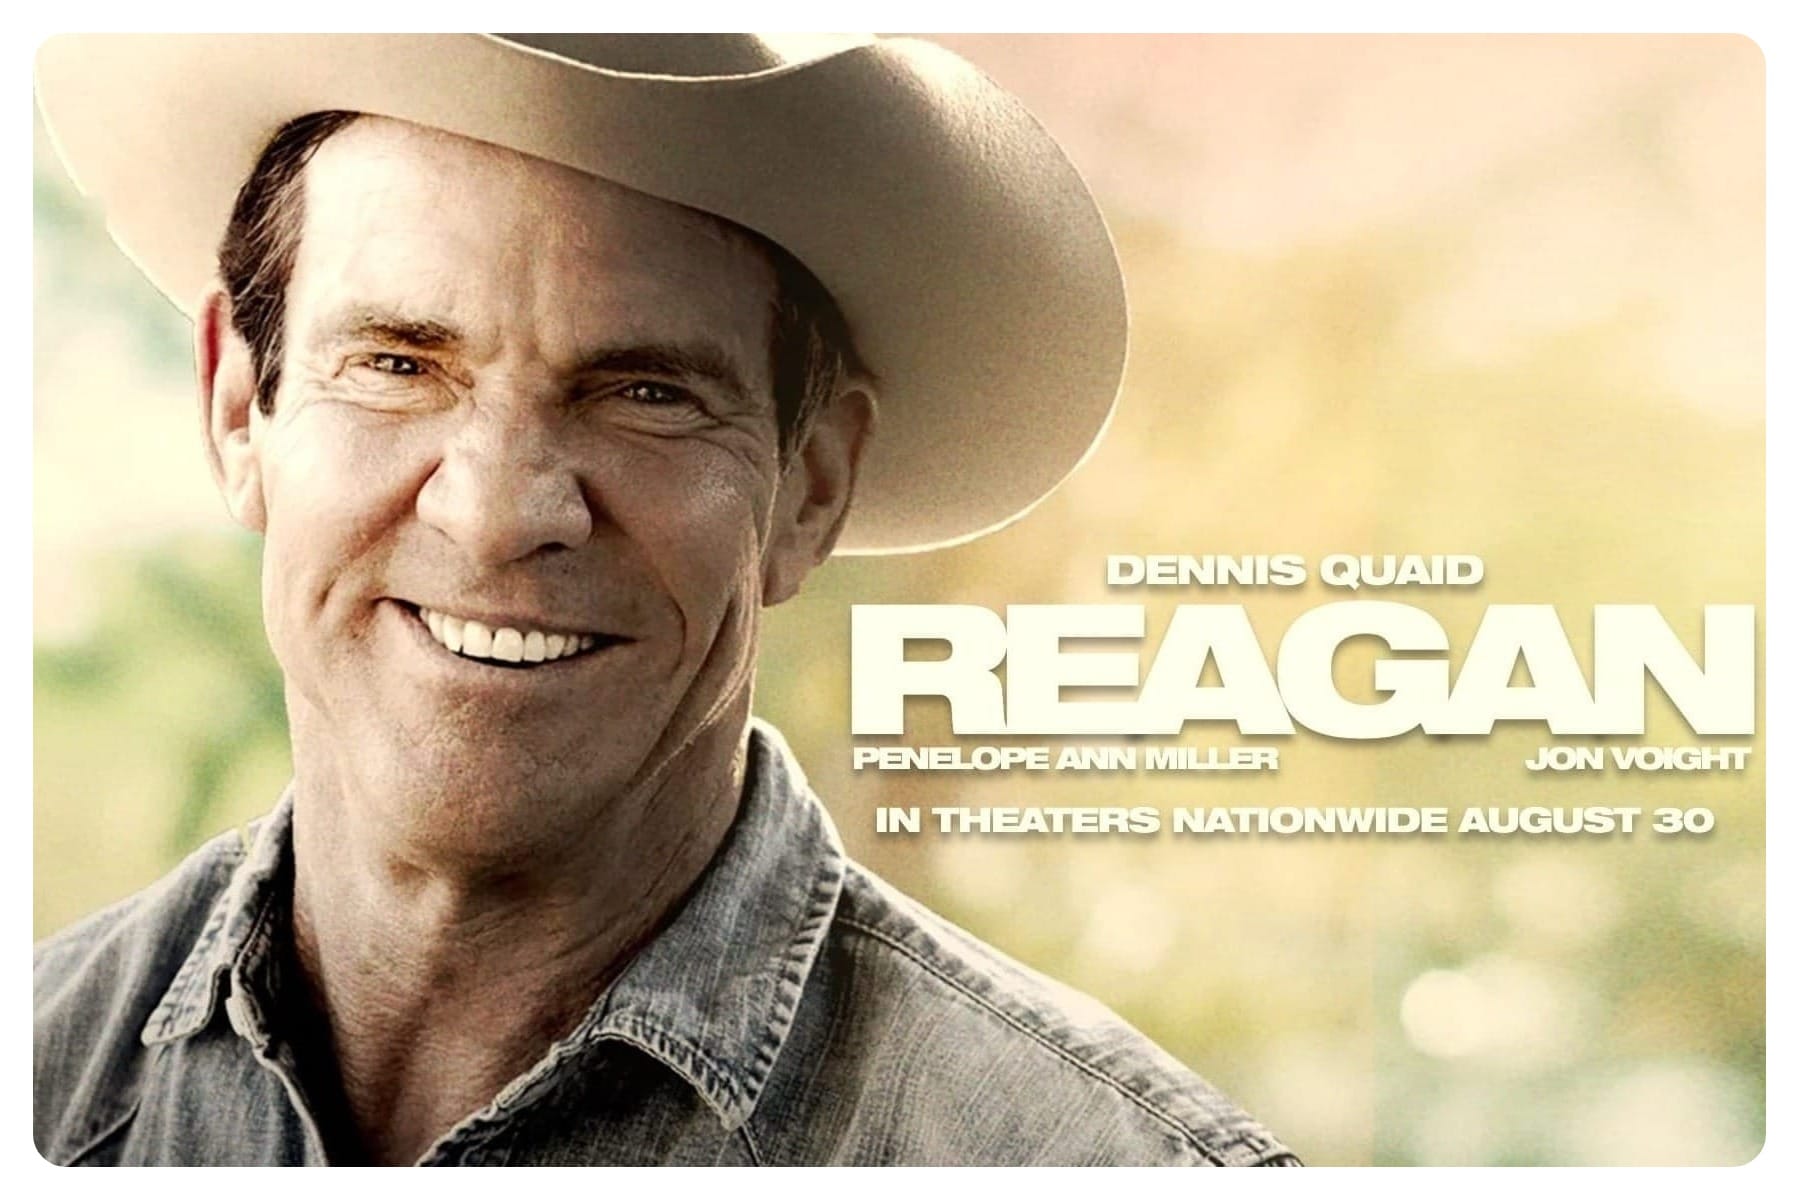 Dennis Quaid's 'Reagan' Gets Theatrical Date, Deal For Distribution